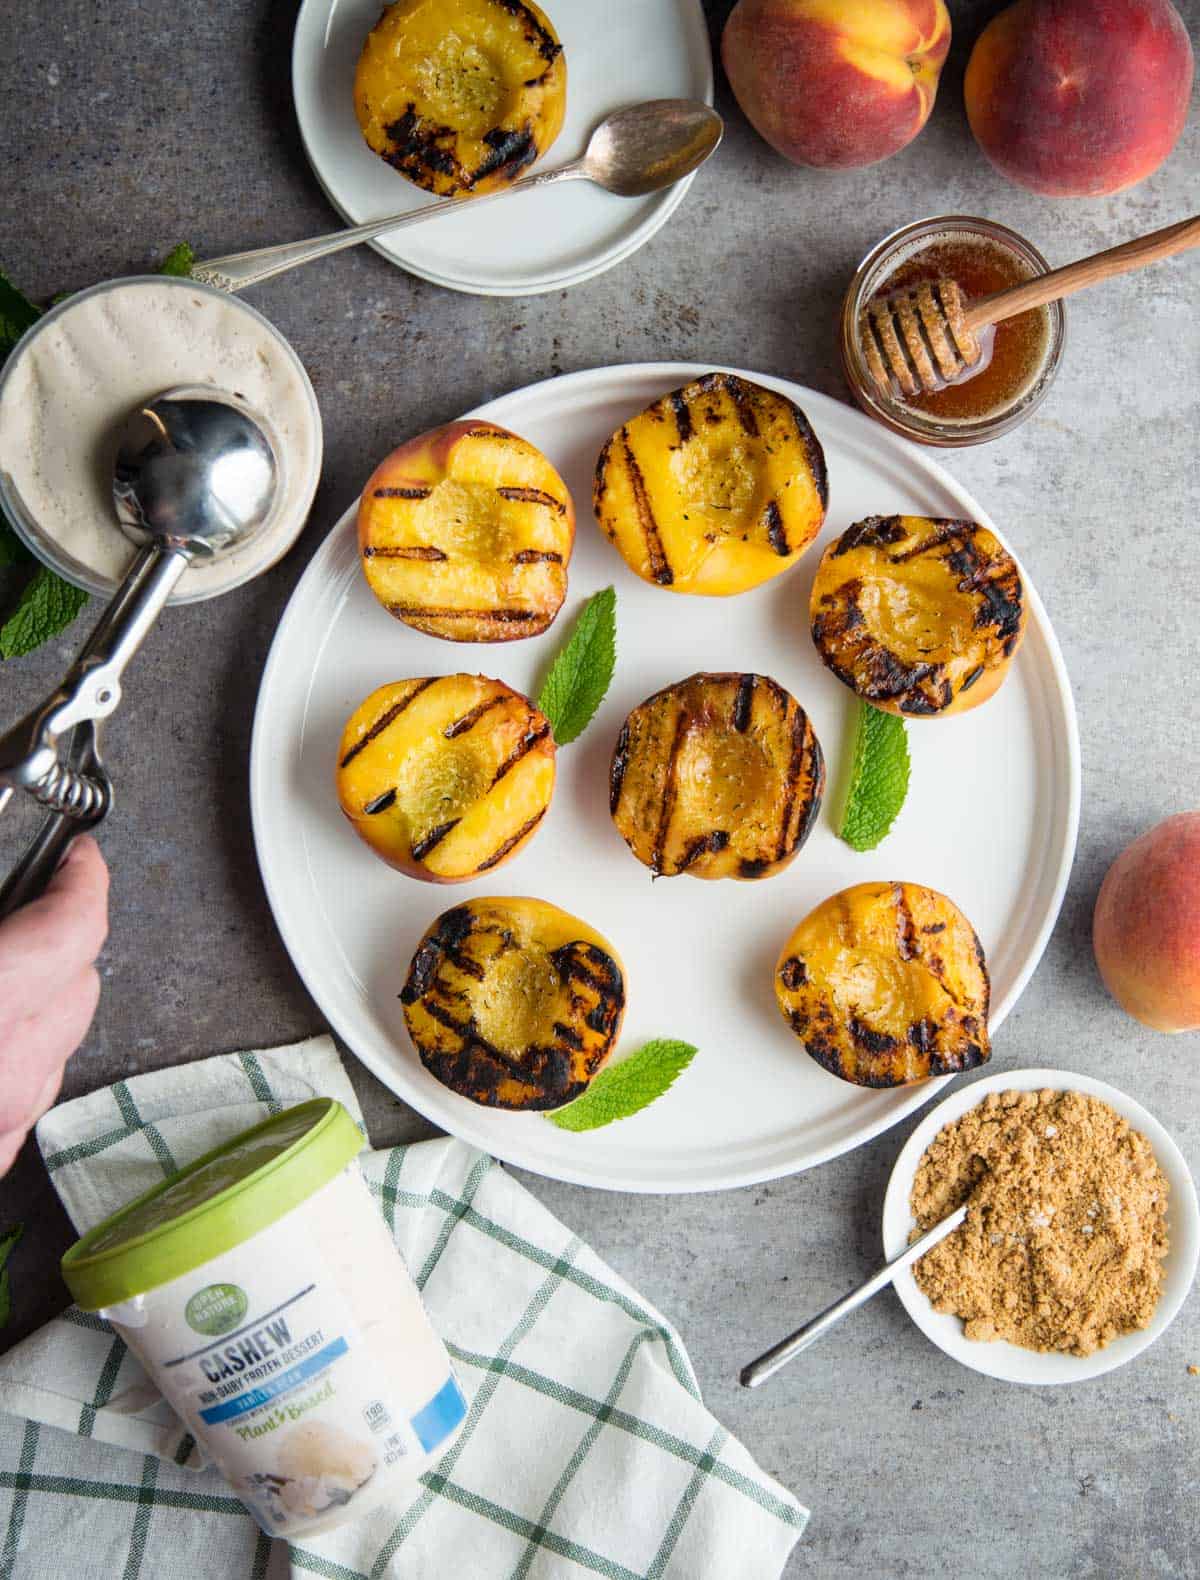 Grilled Peaches on a platter with a hand scooping ice cream